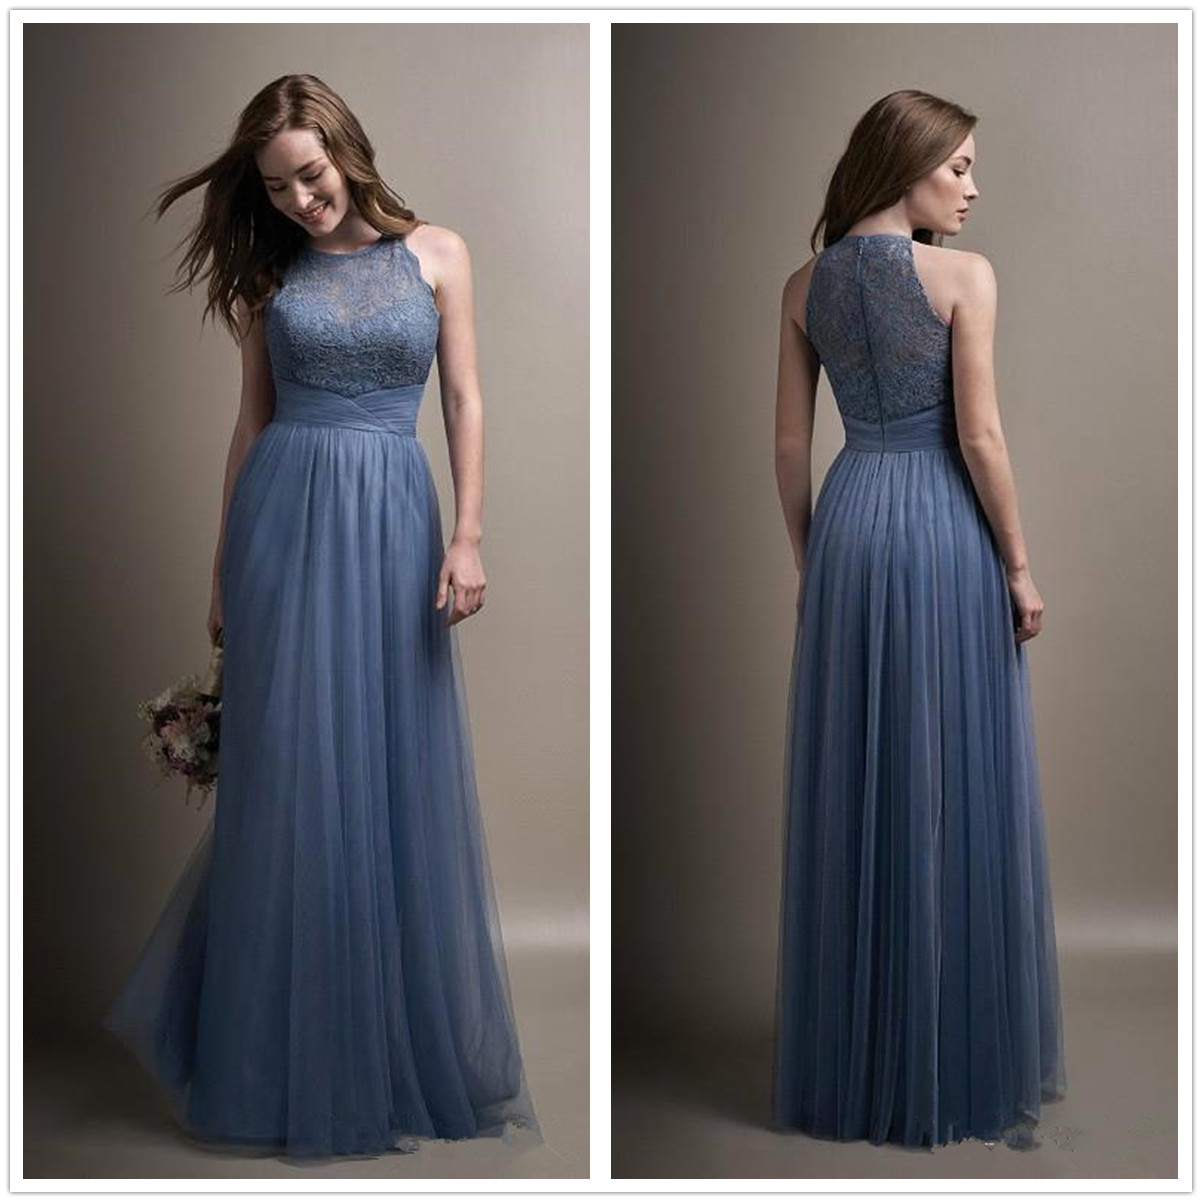 

2018 New Dusty Blue Tulle Long Bridesmaid Dresses Crew Neck Lace Ruffle Floor Length Party Evening Prom Dresses BA7433